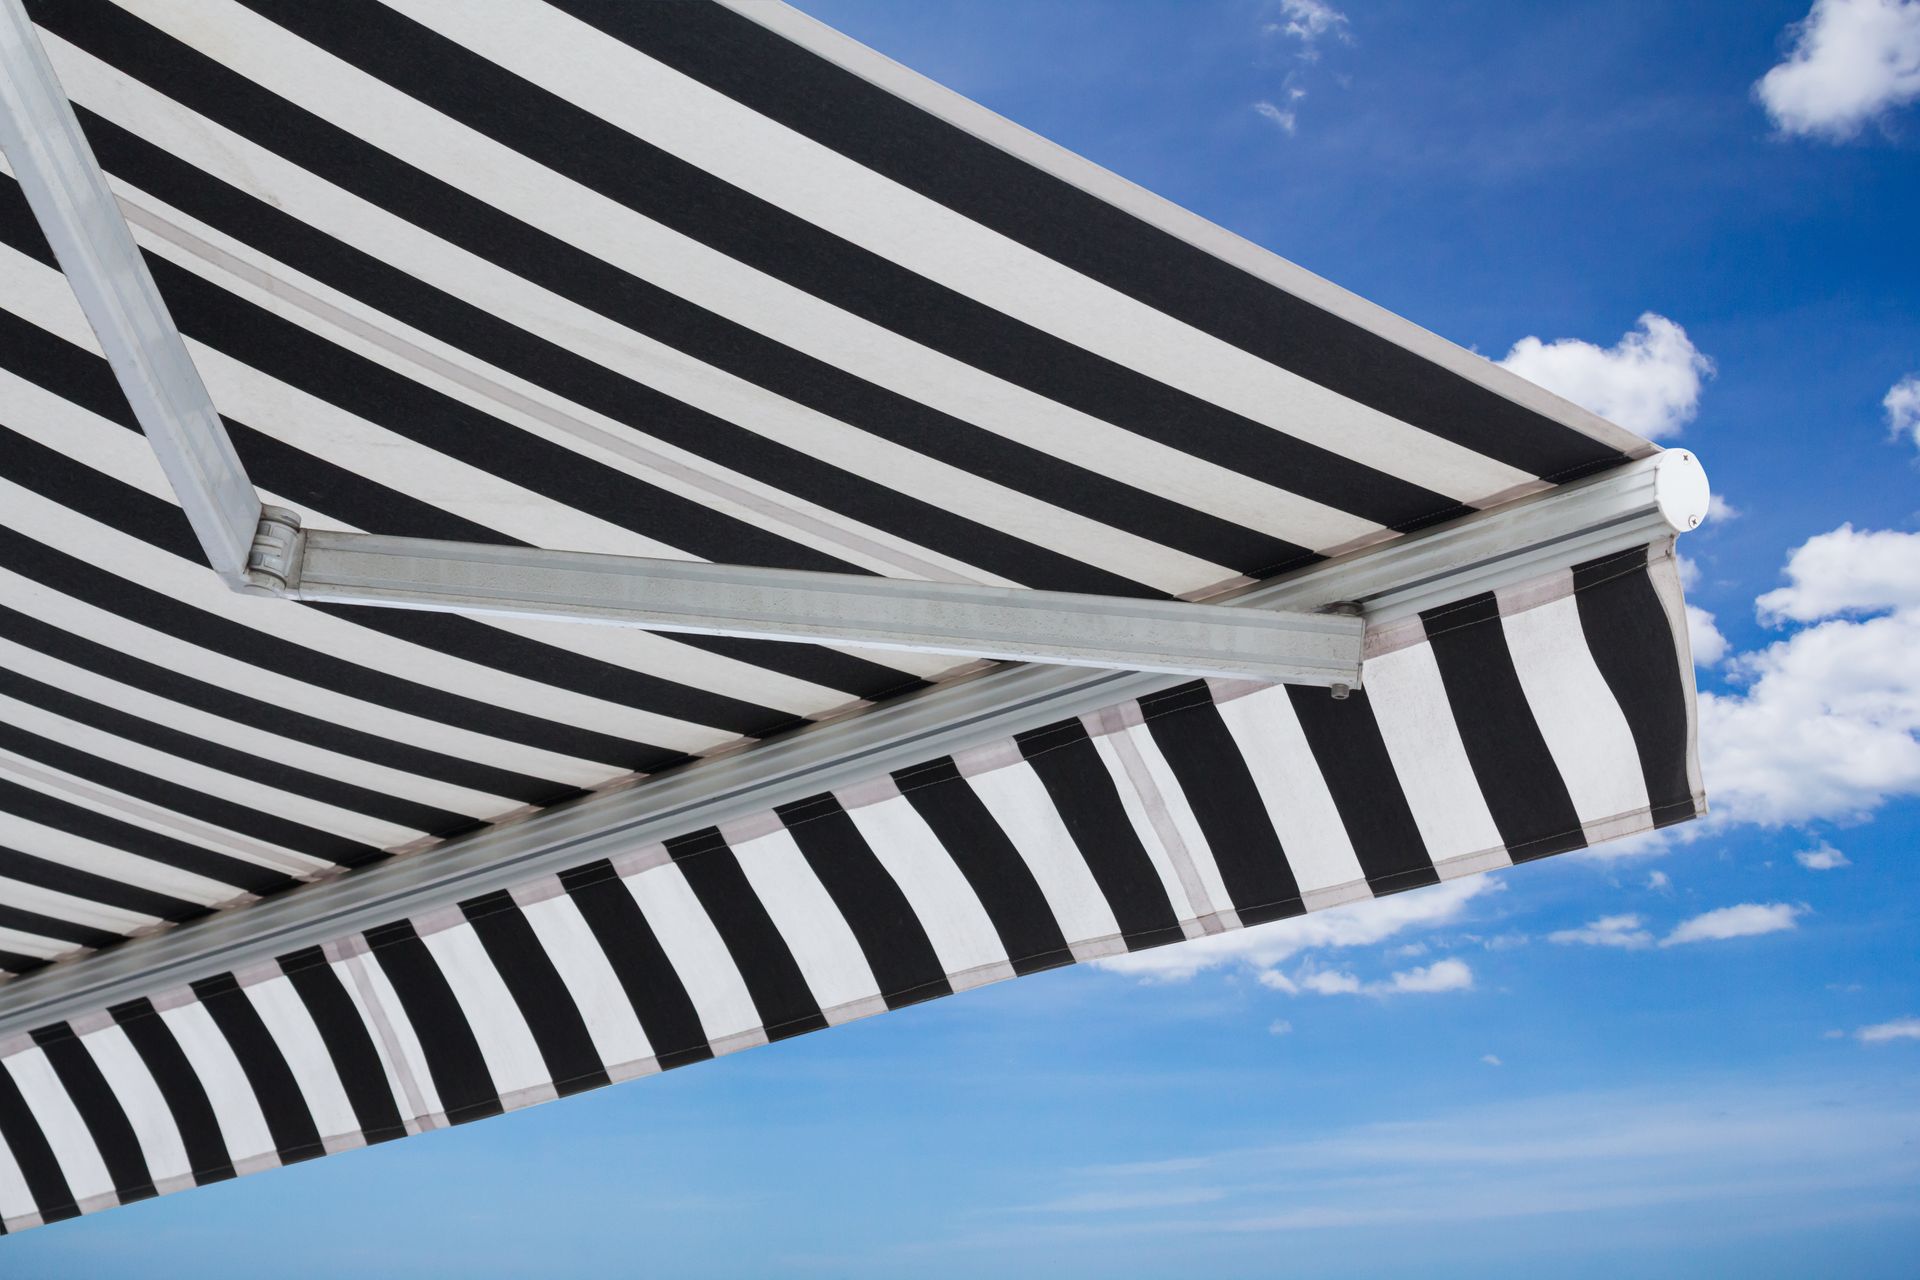 History Of Awning And How It Has Evolved